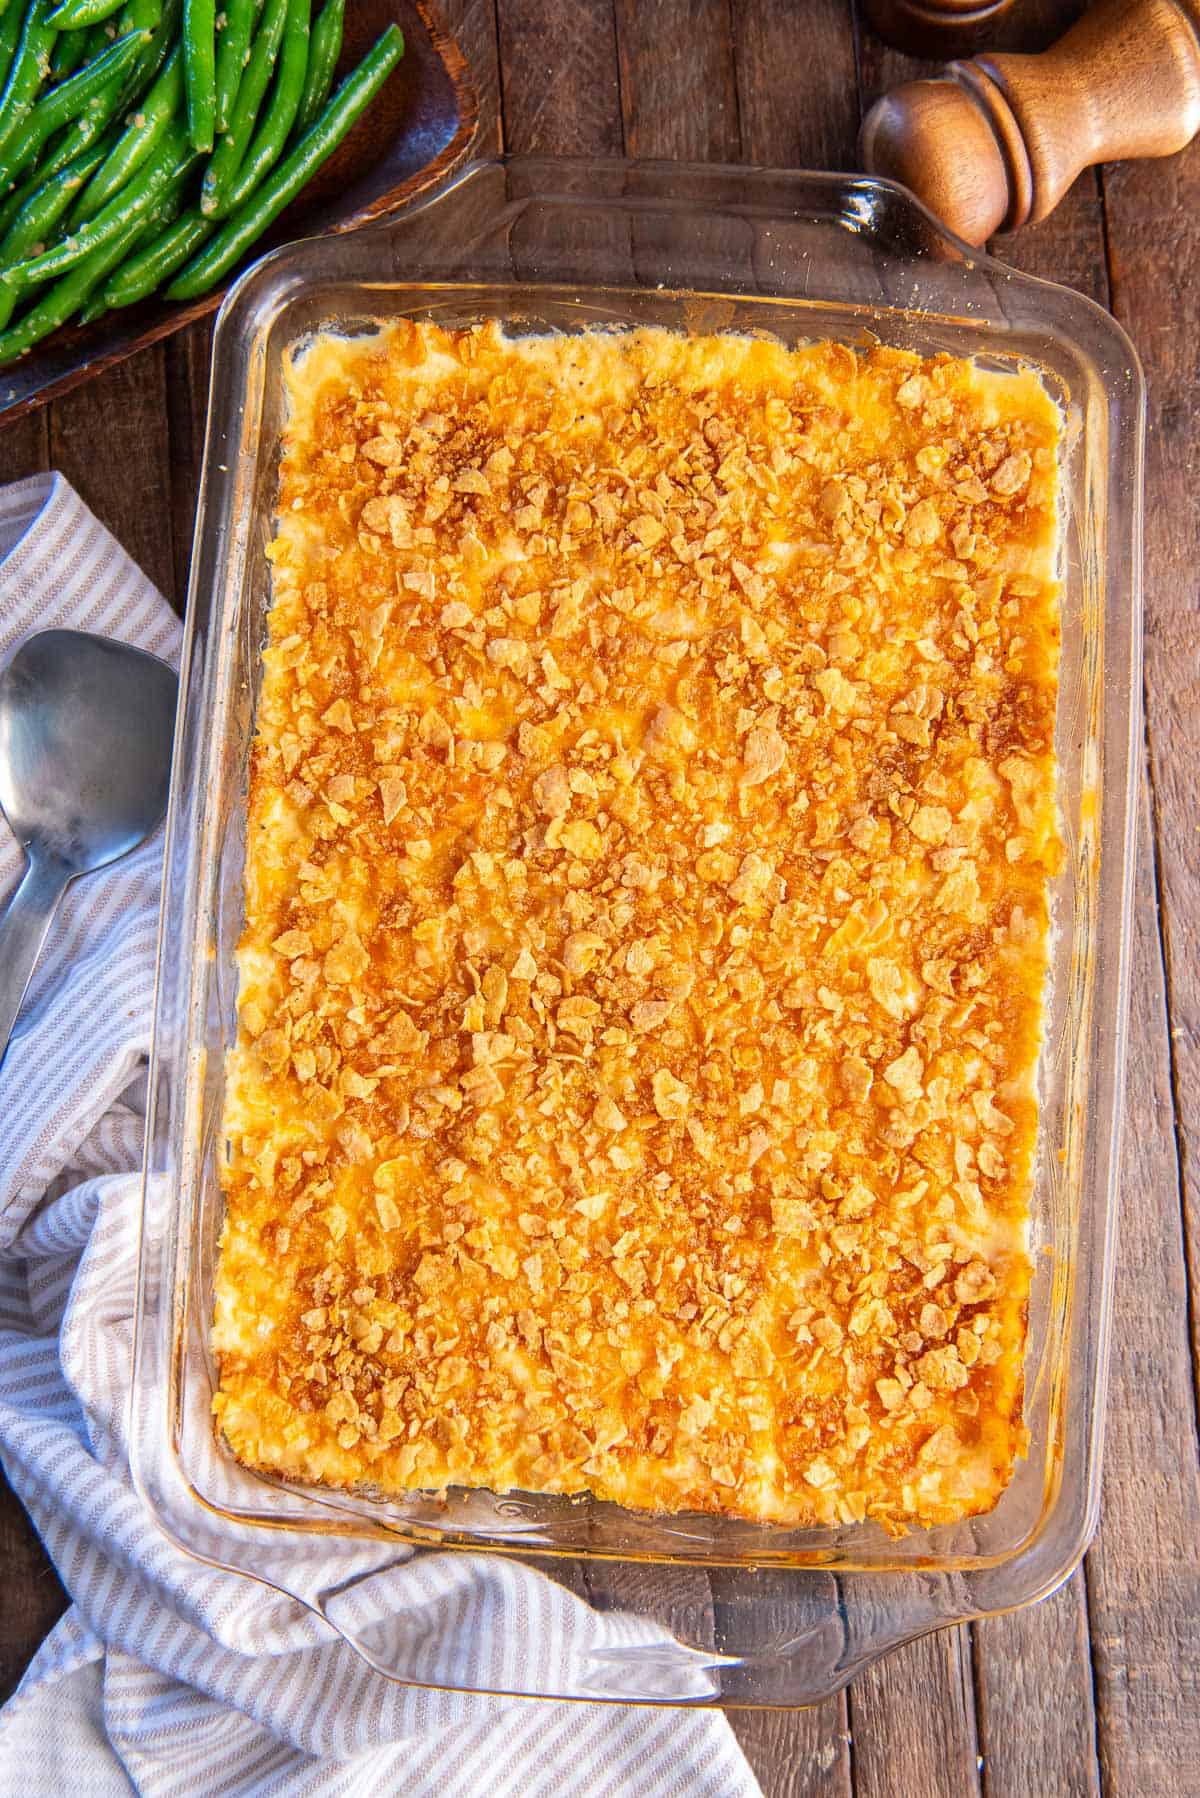 Hash brown casserole topped with corn flakes in a baking dish.